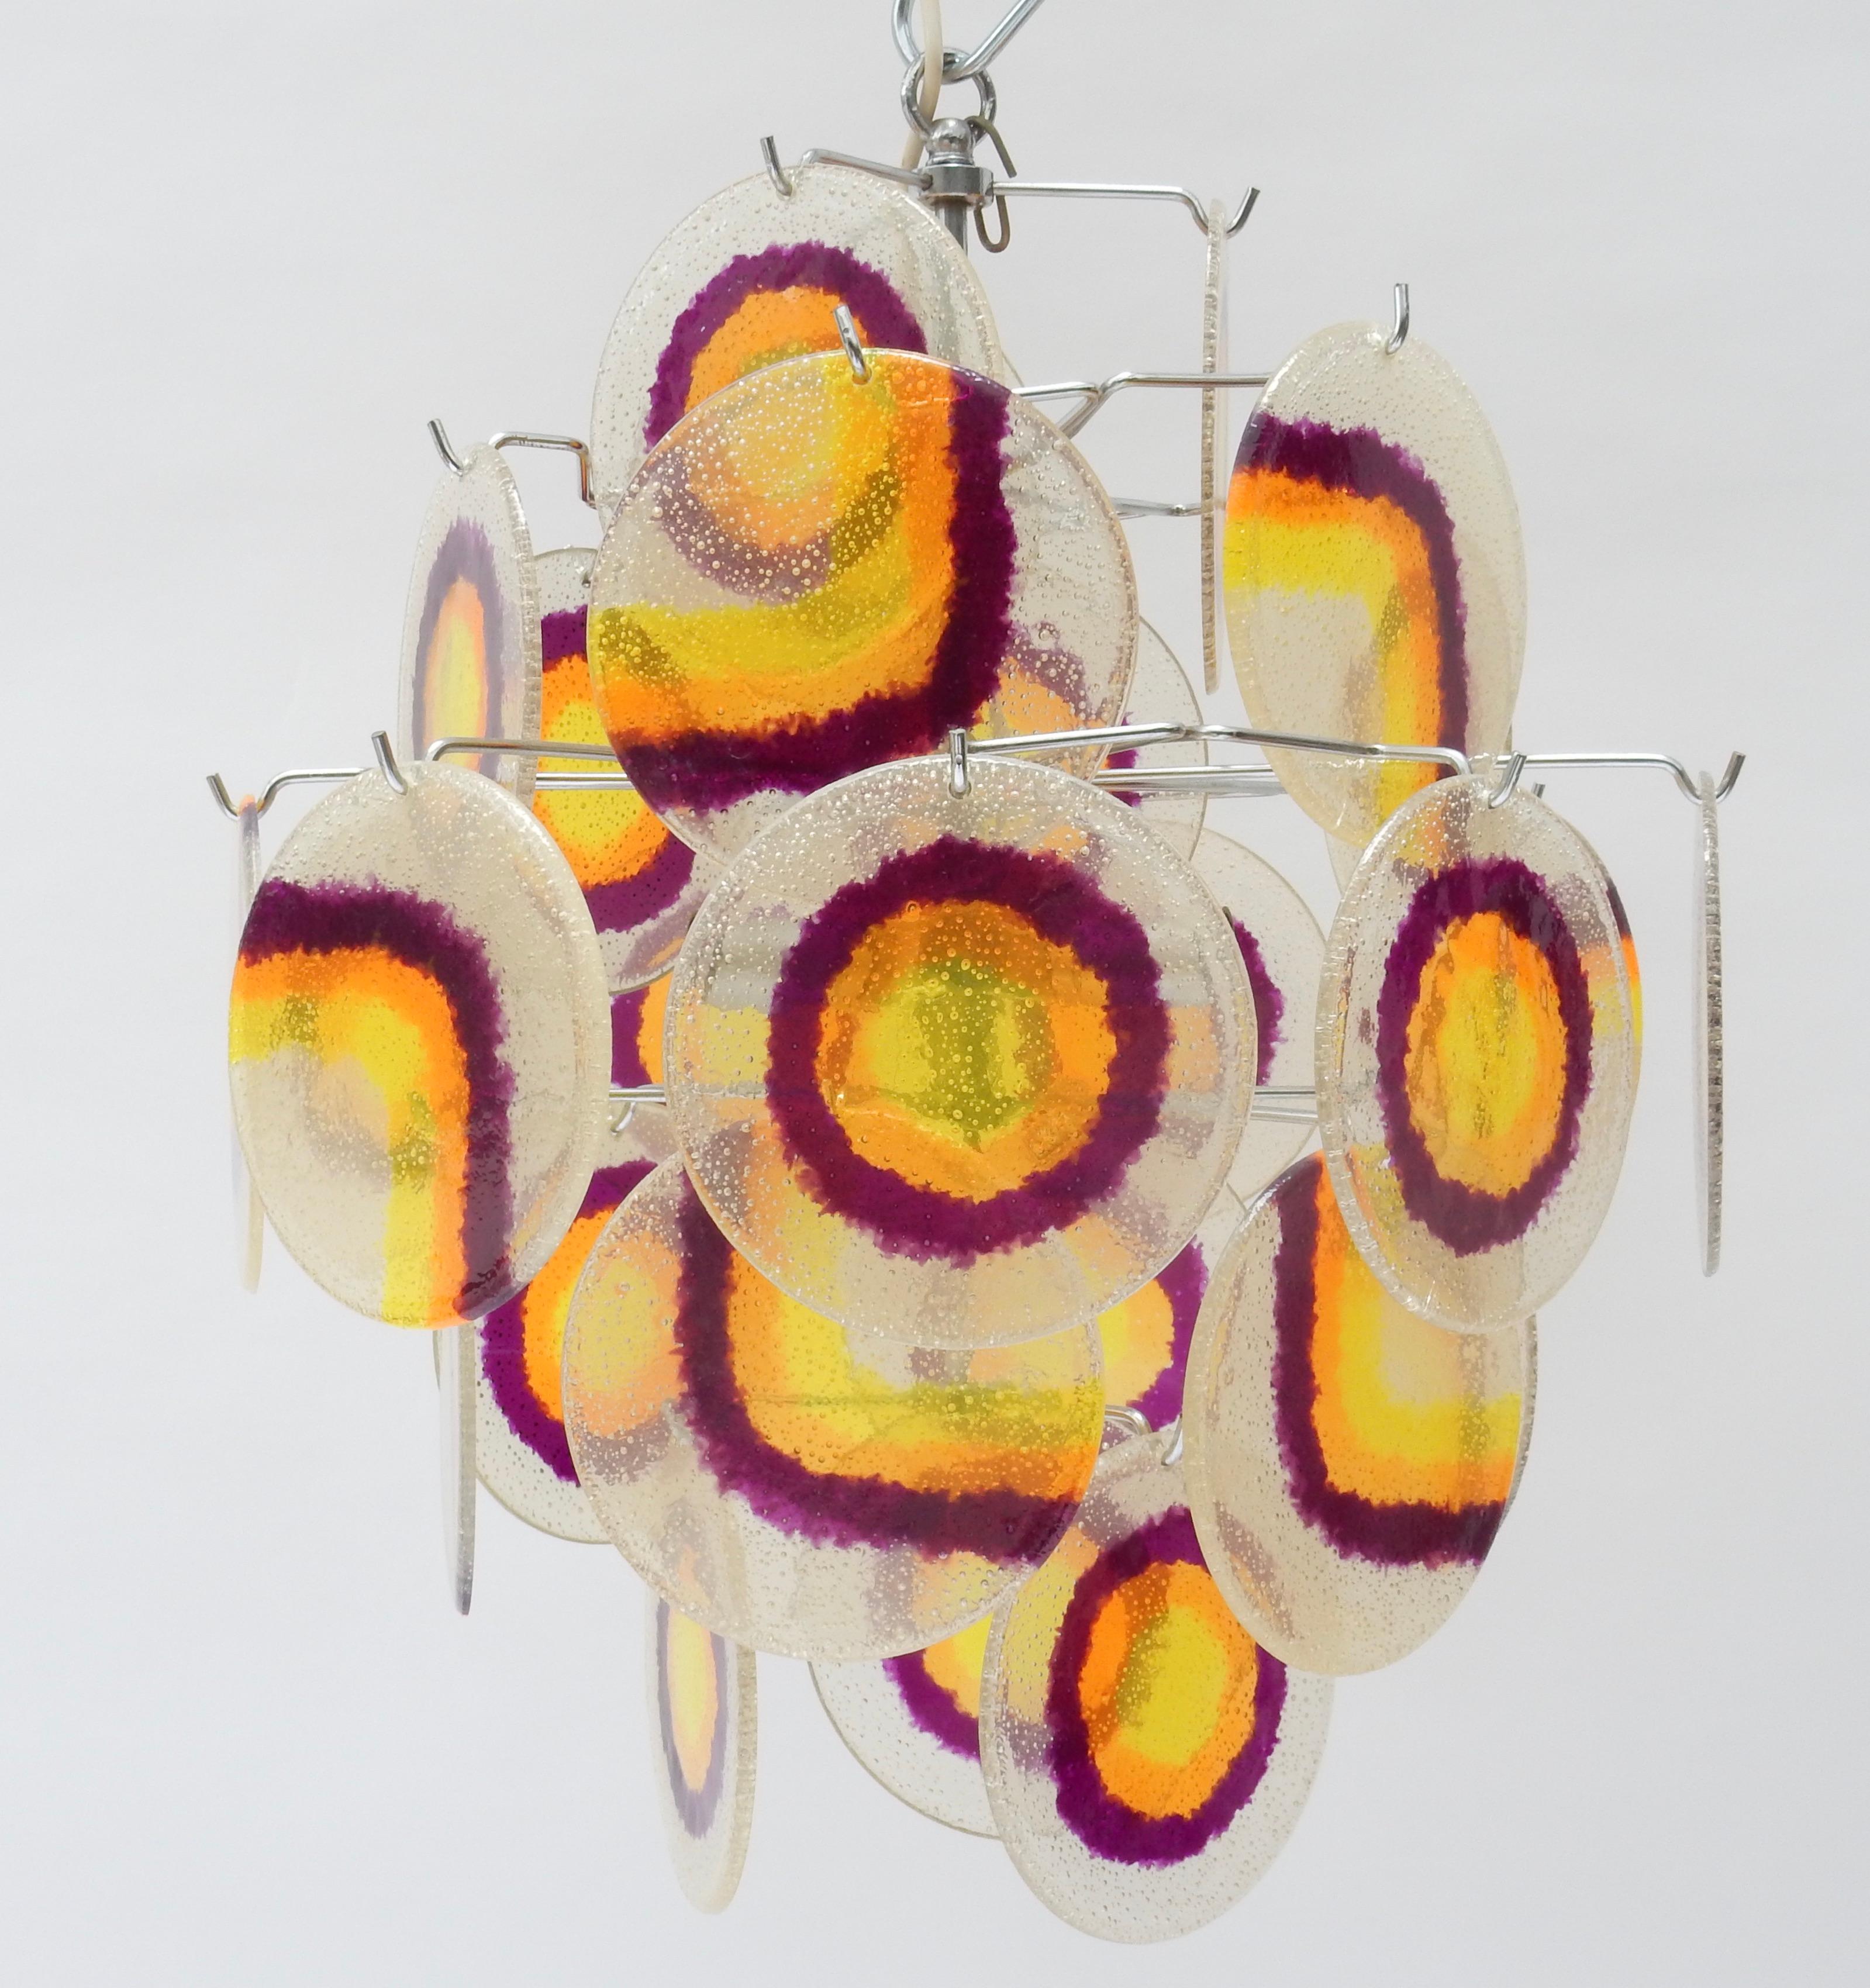 Lucite disc chandelier, 1970s with purple, orange and yellow patterns.